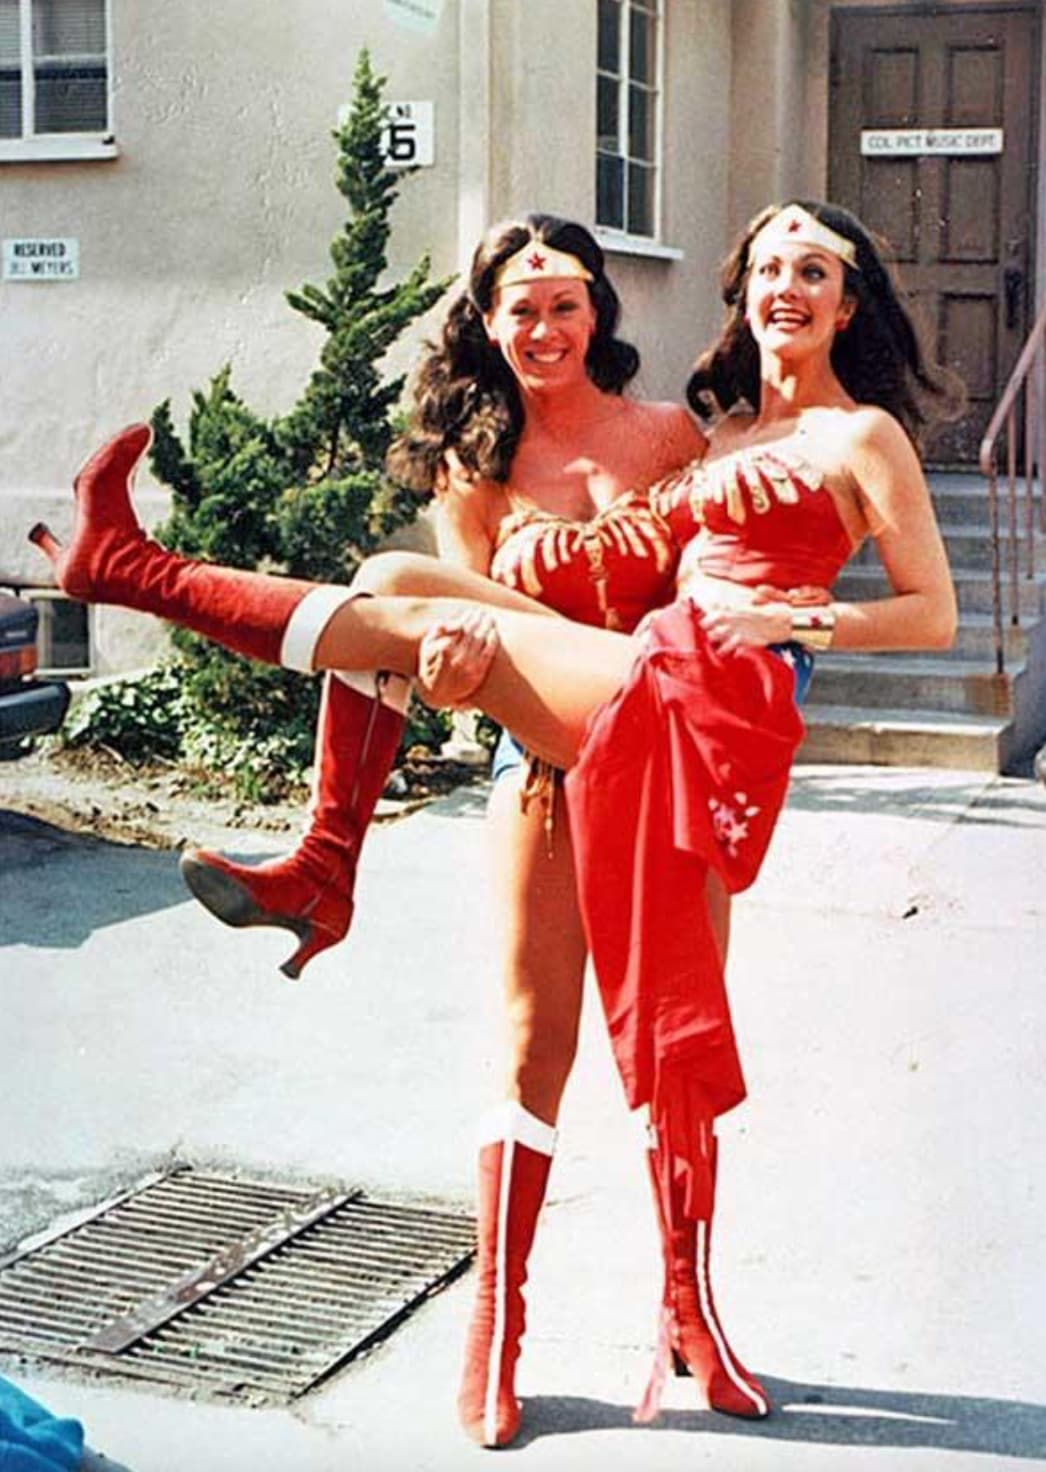 wonder woman stunt double lynda carter - Reserved Bmeters 5 Col Pict Music Defe